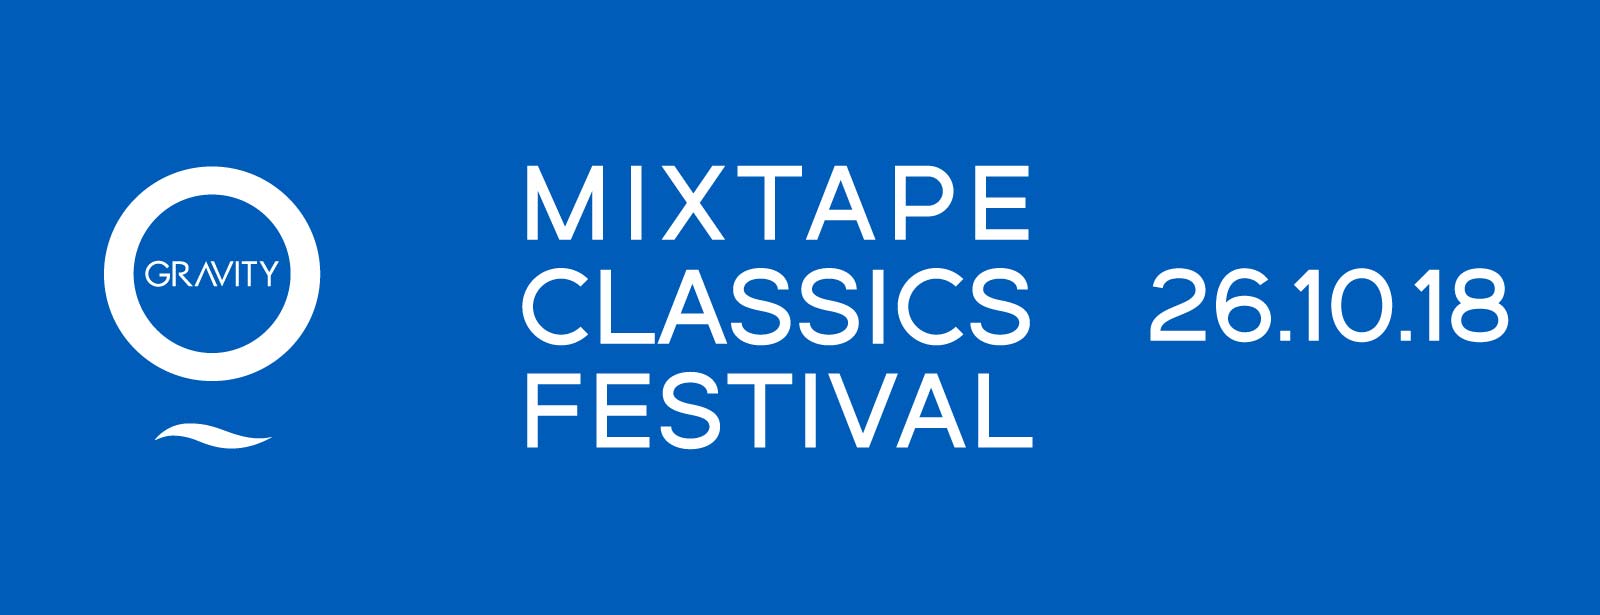 Mixed Tape Classics Festival - Coming Soon in UAE